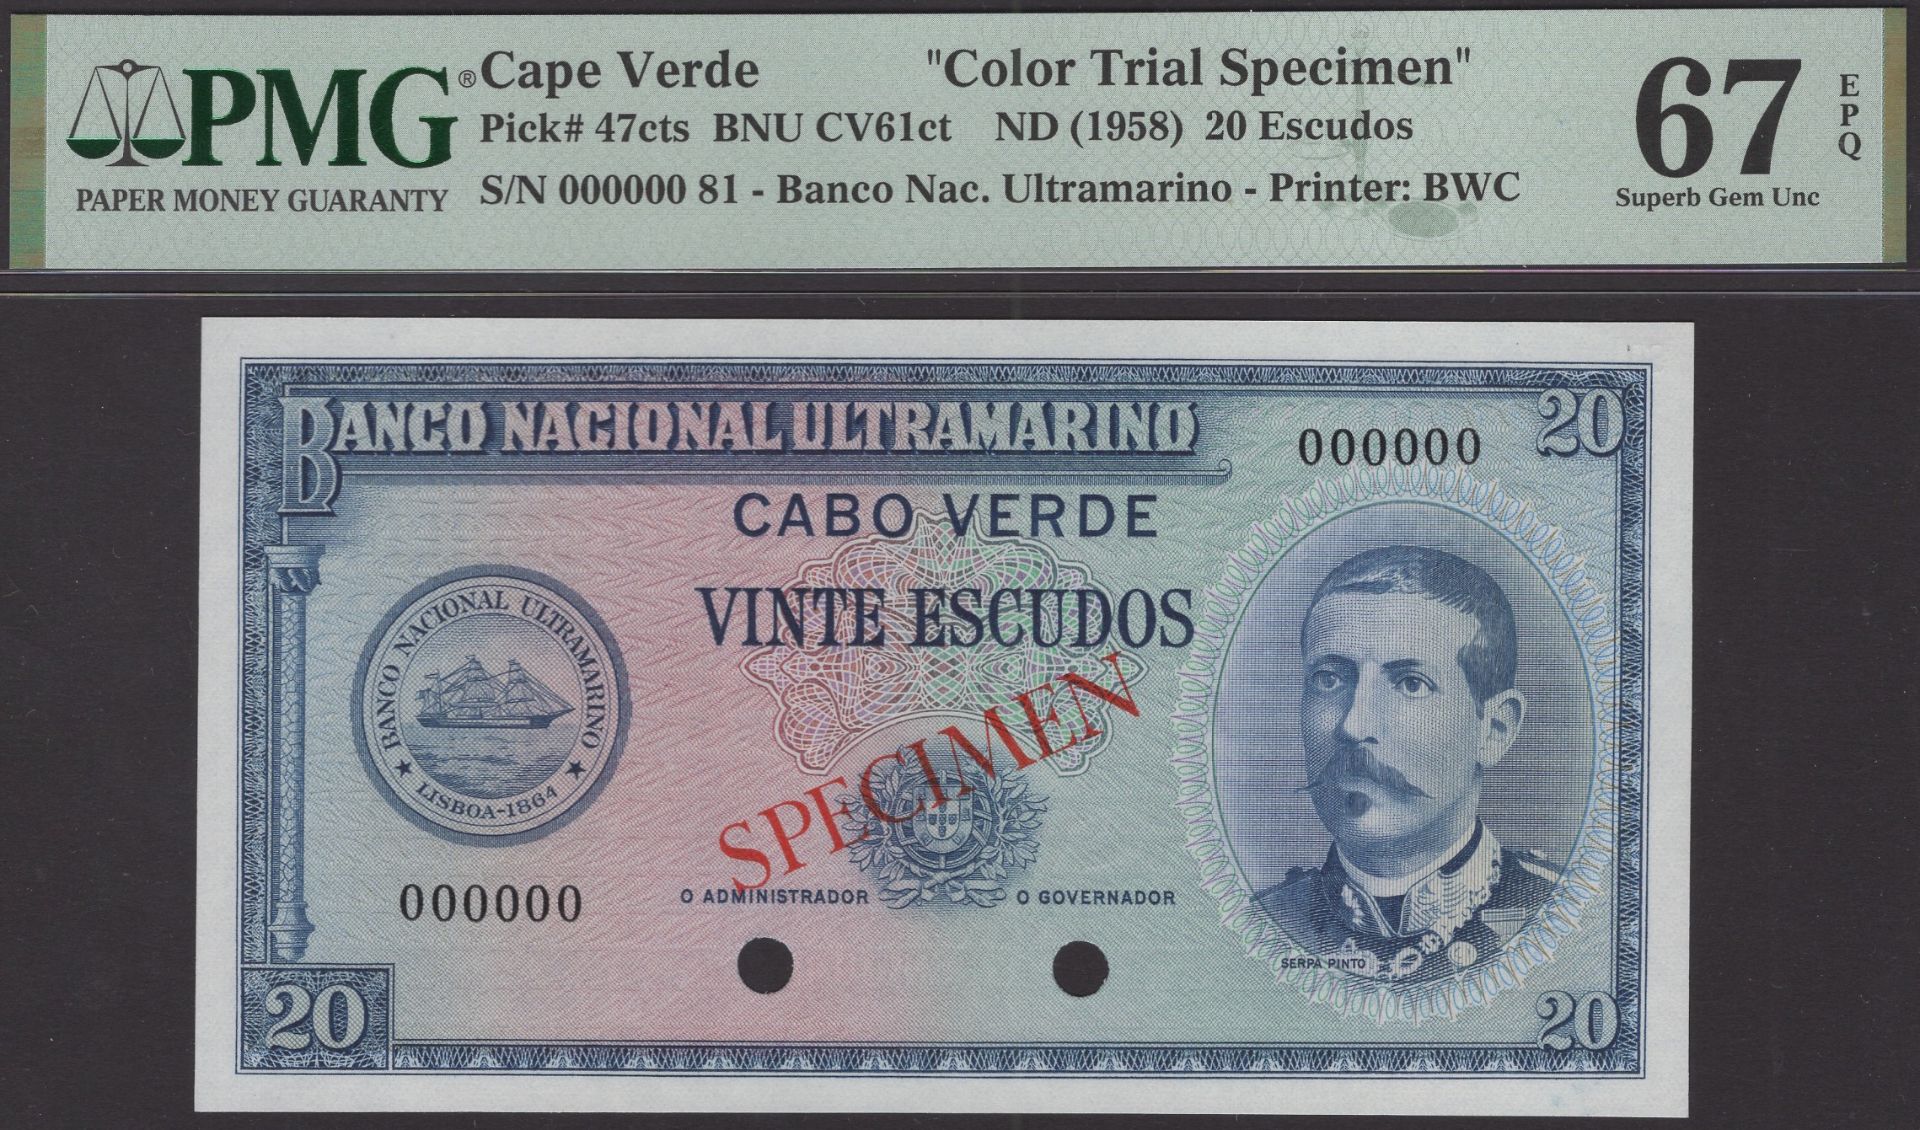 The Laurence Pope Collection of Portuguese Colonial Banknotes - Part One